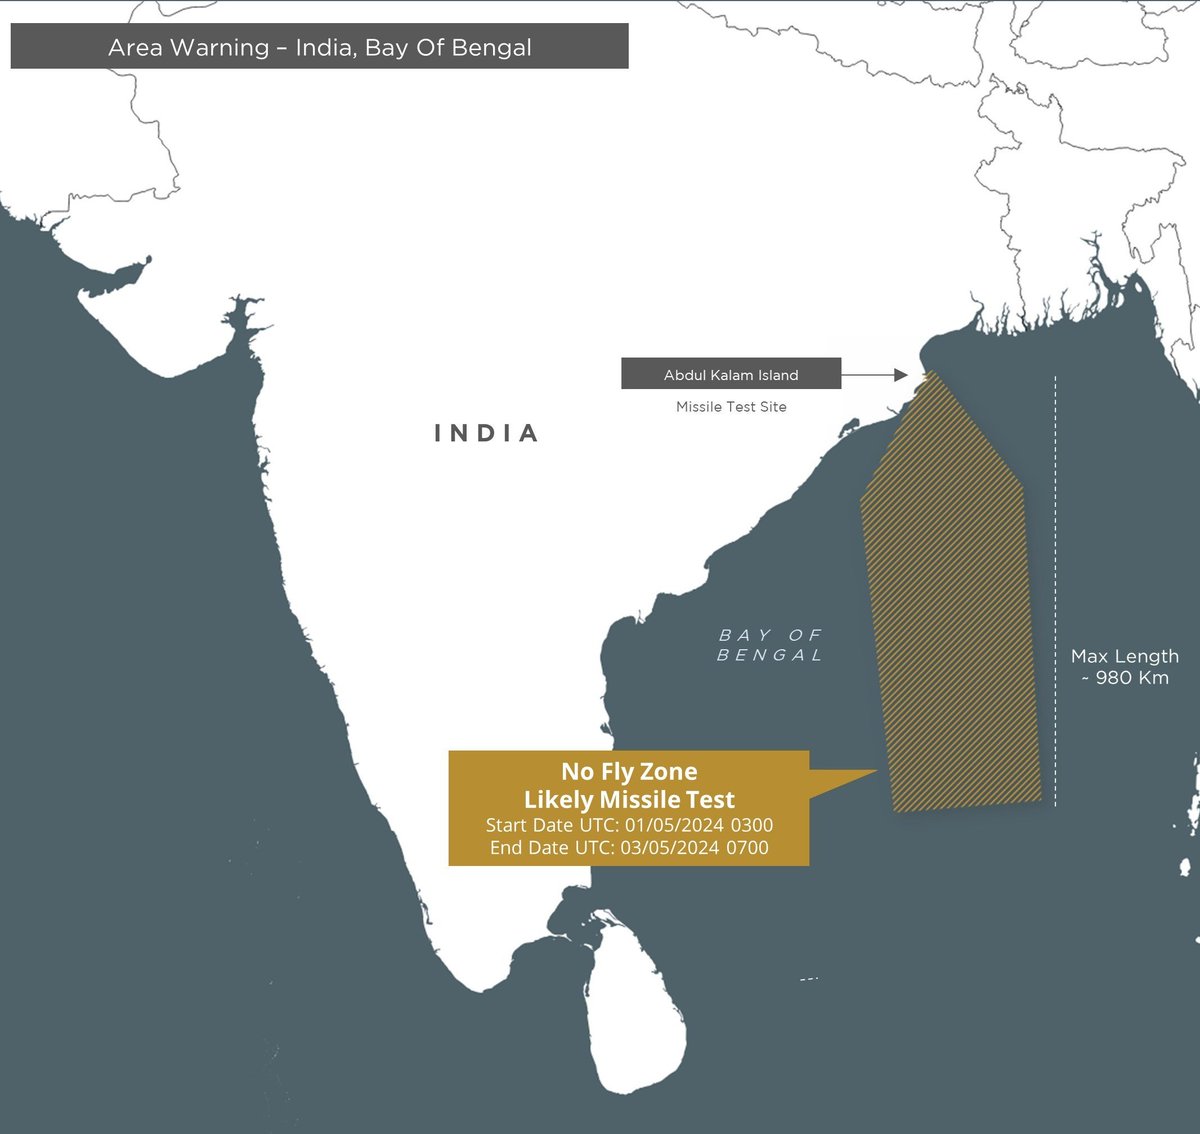 ⚠️  #AreaWarning #India issues a notification for a no fly zone over the Bay Of Bengal Region indicative of a likely missile test on  01-03 May 2024.